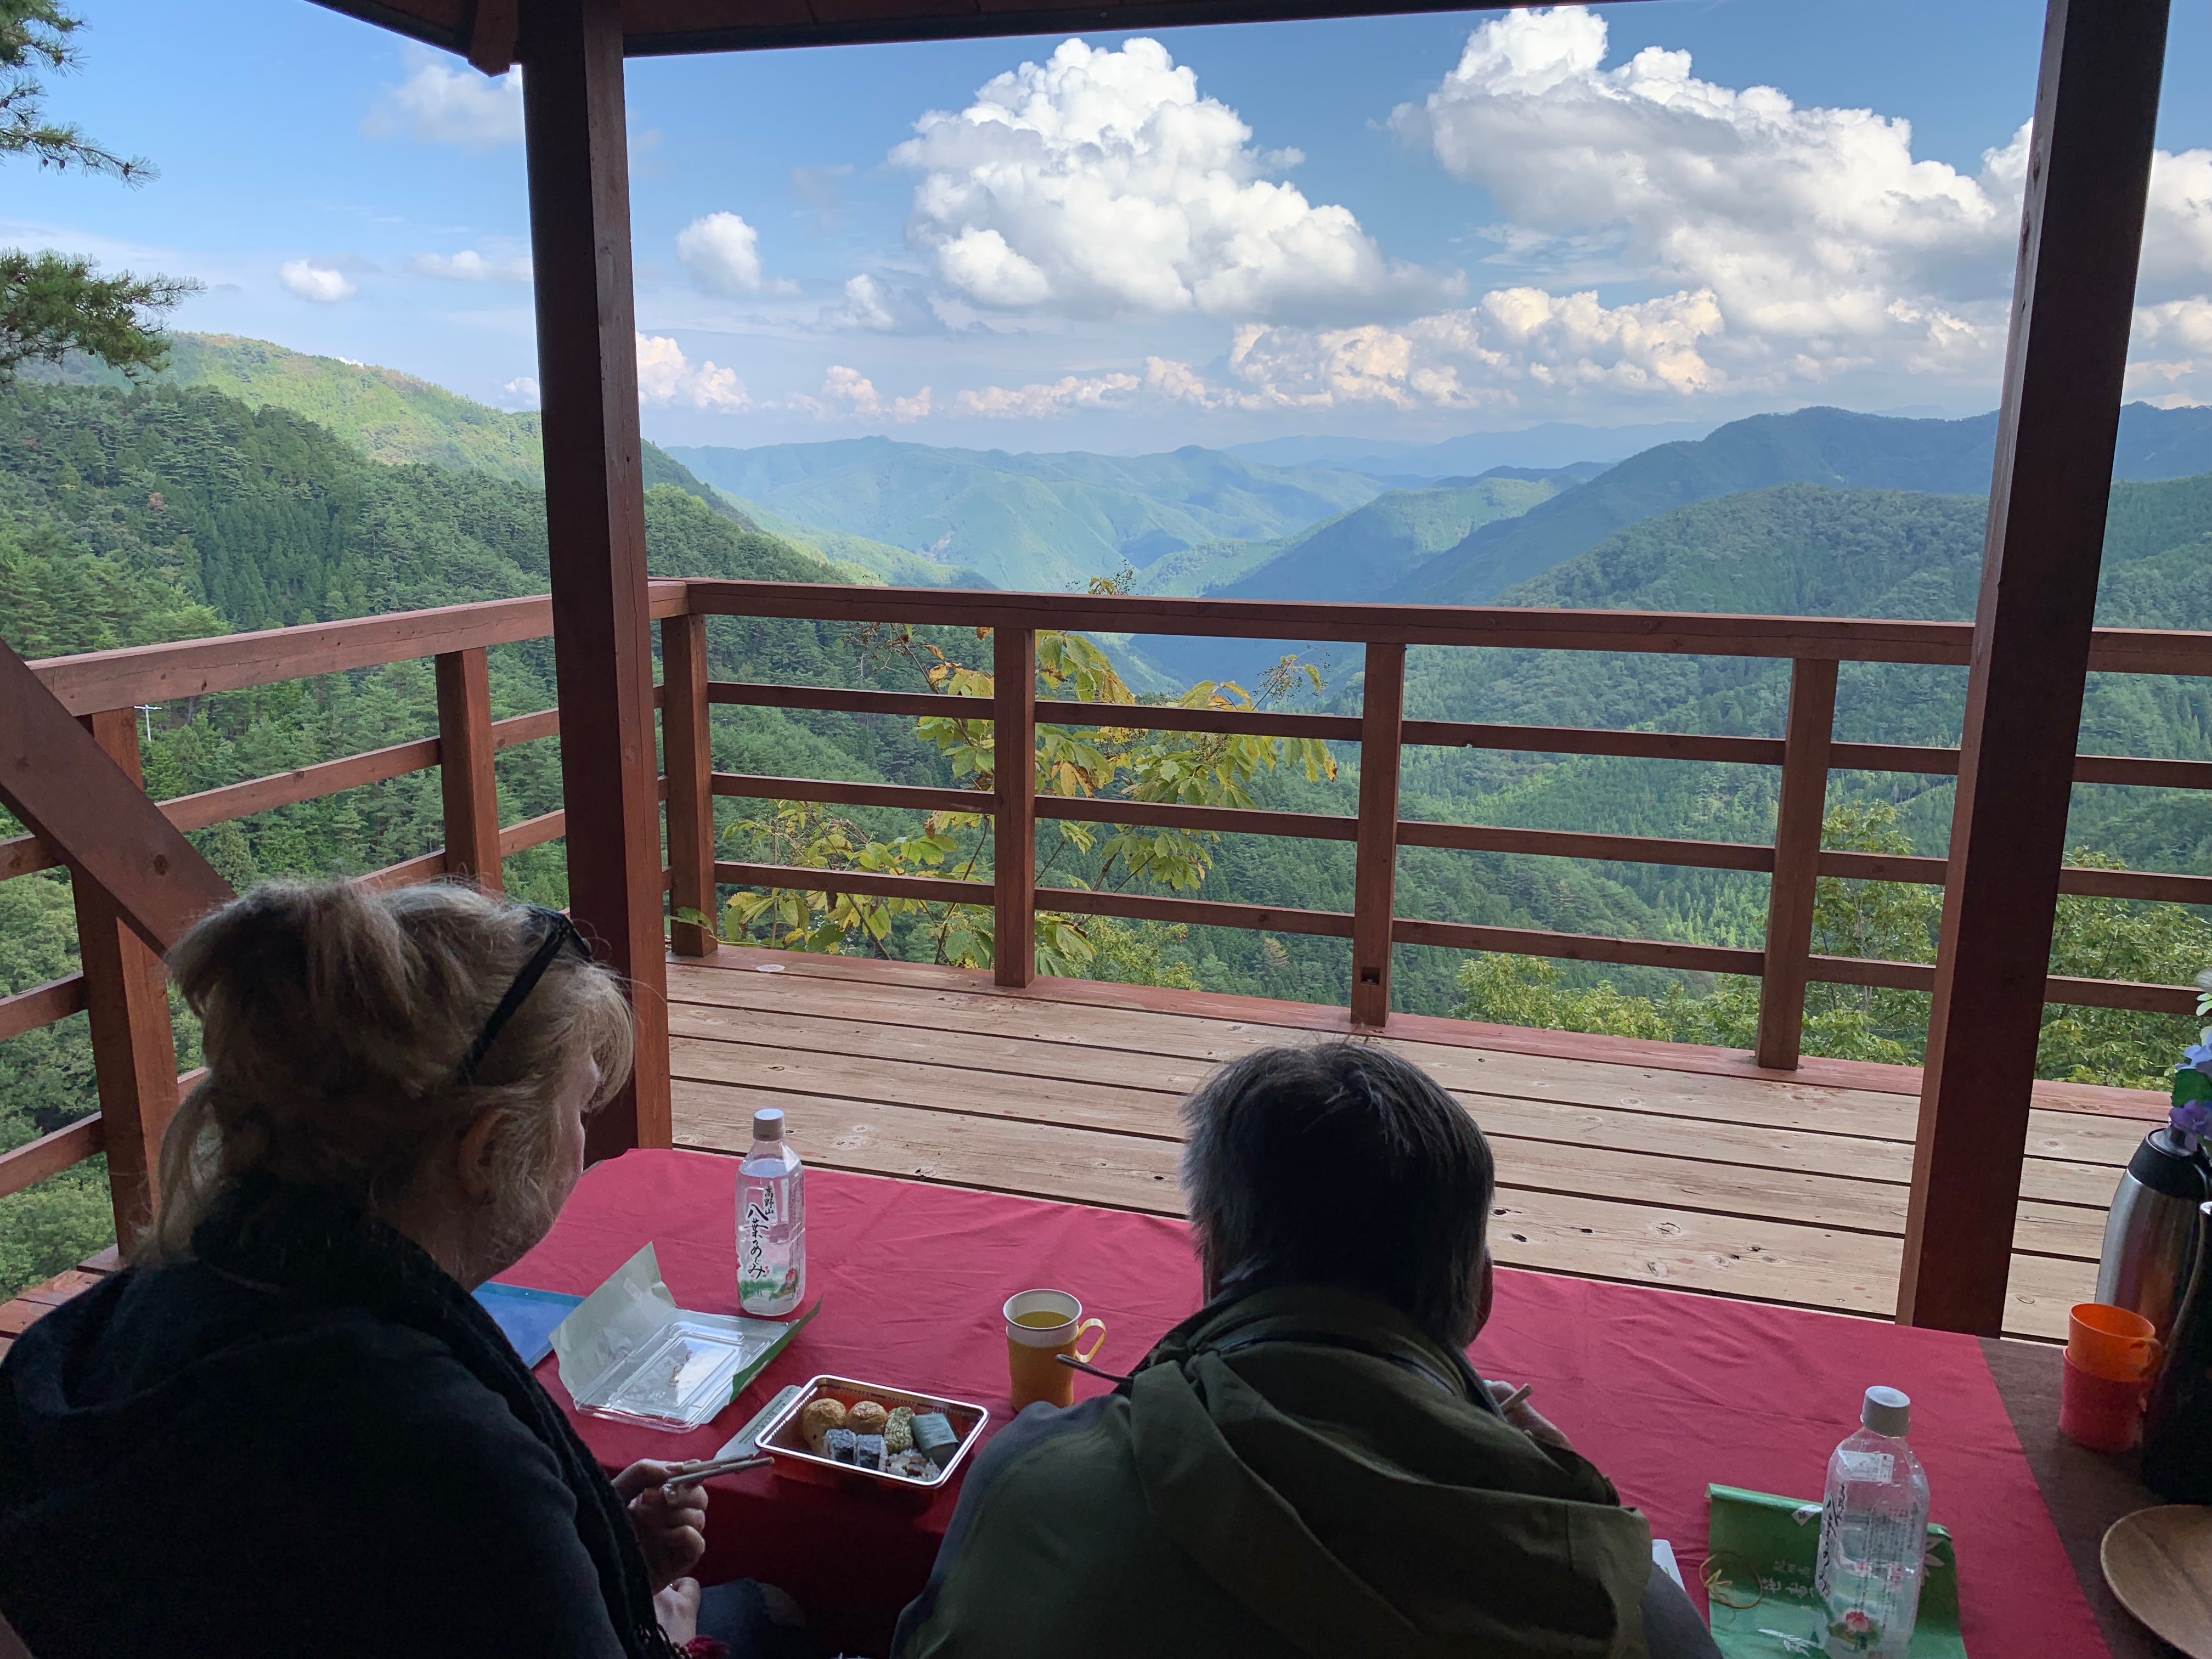 Lunch with superb view! Hiking ancient pilgrimage trail